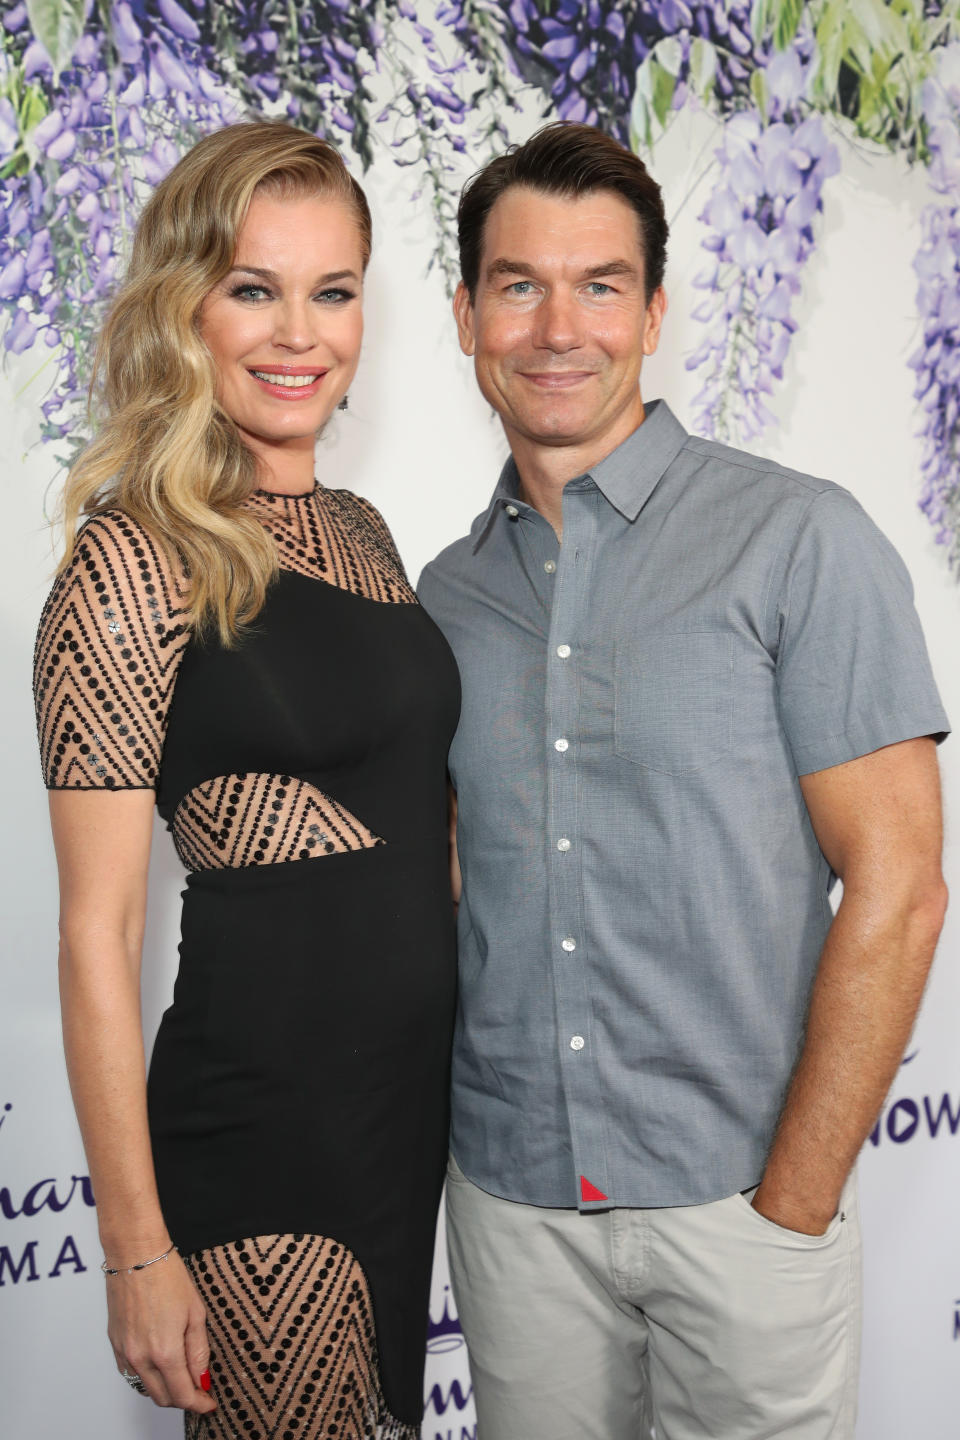 Rebecca Romijn and Jerry O'Connell (Photo by Chelsea Lauren/Variety/Penske Media via Getty Images)